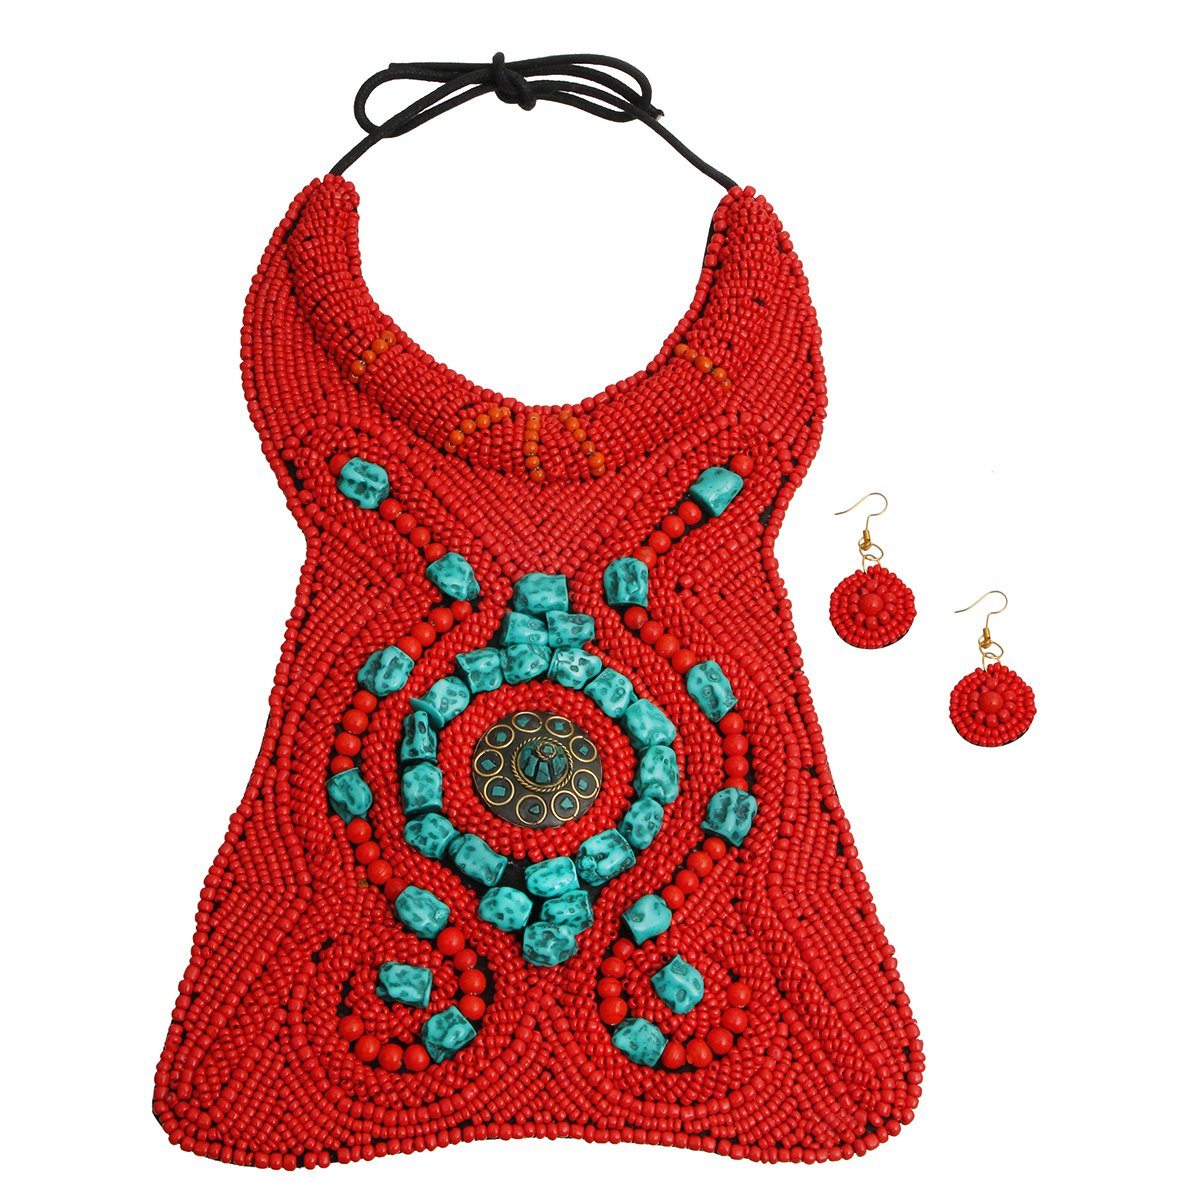 Red and Turquoise Bead Raised Collar Long Bib Necklace Set